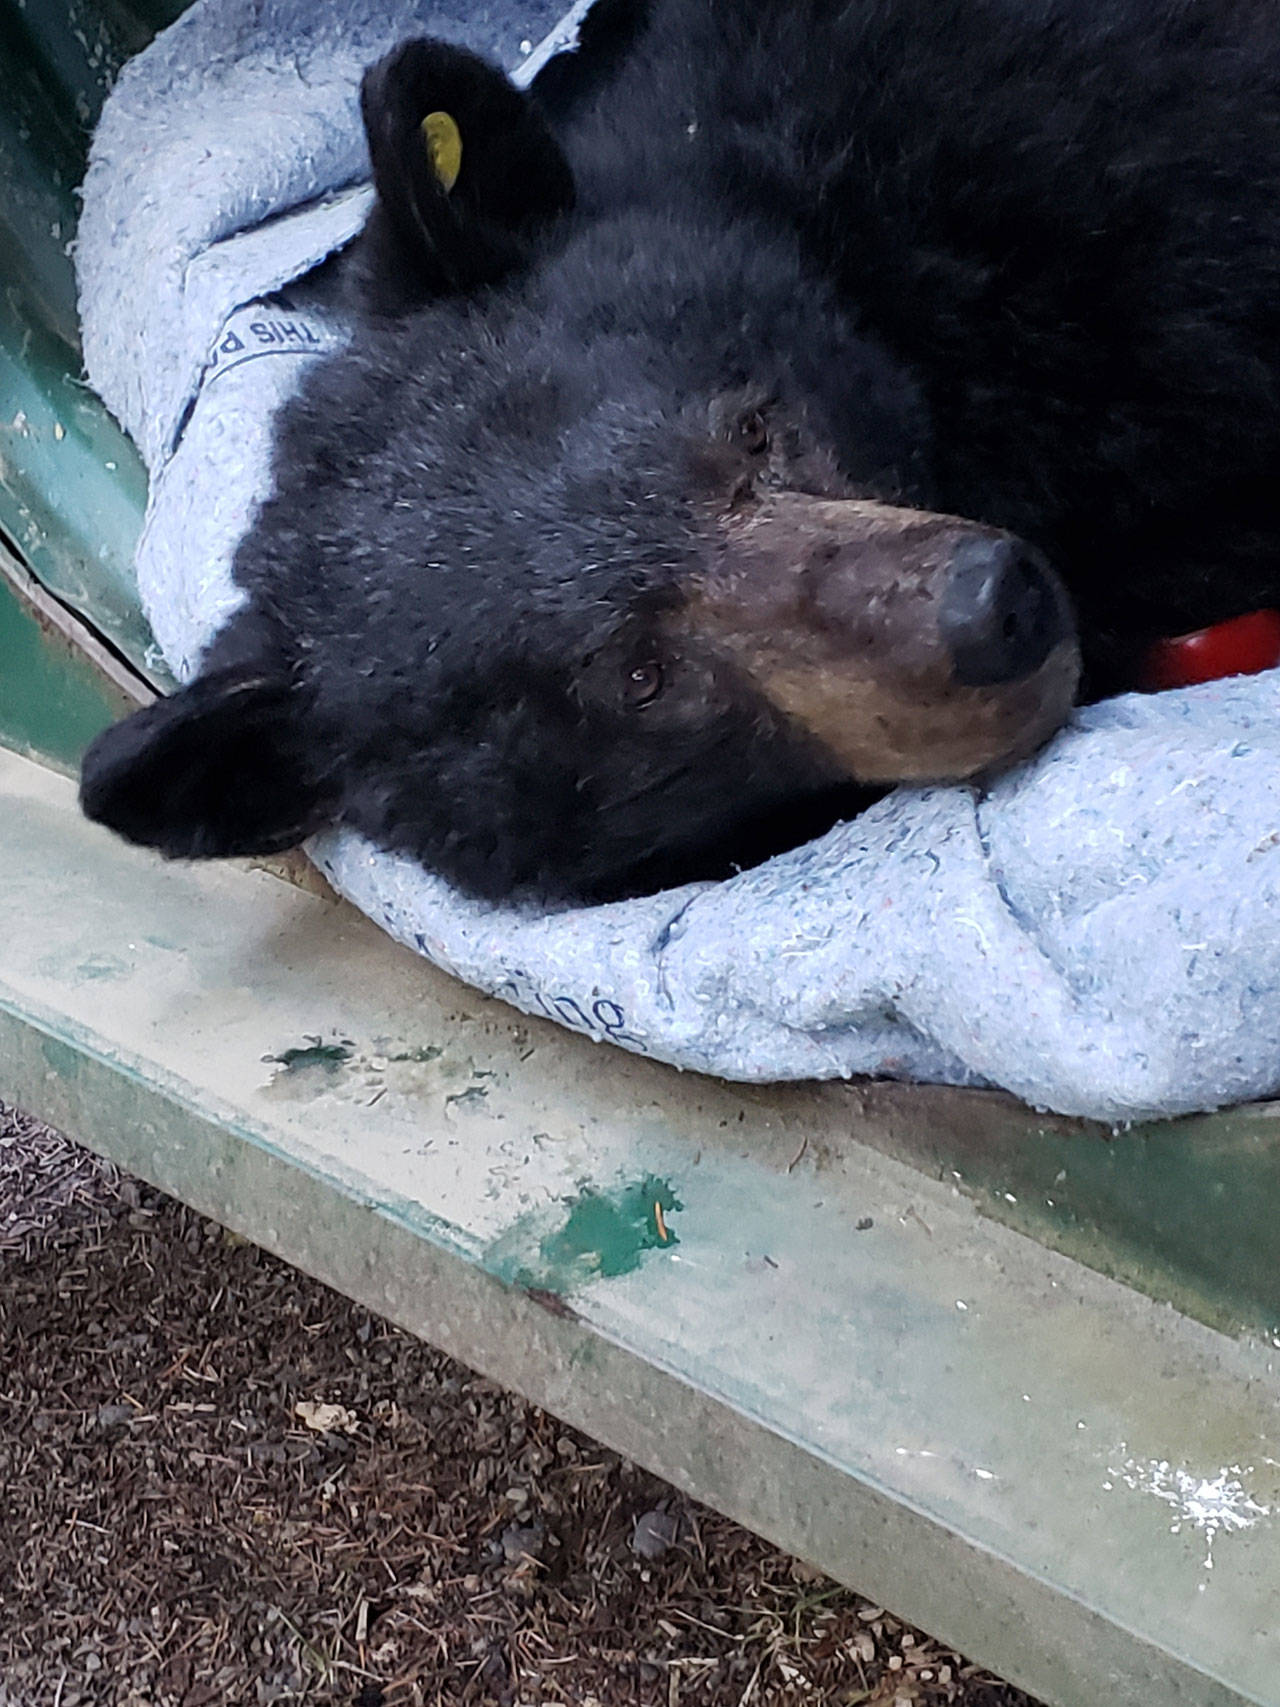 A 2-year-old black bear is darted and transported into the upper Dungeness watershed by wildlife officers April 11, 2020. (Photo courtesy of Washington Department of Fish and Wildlife)